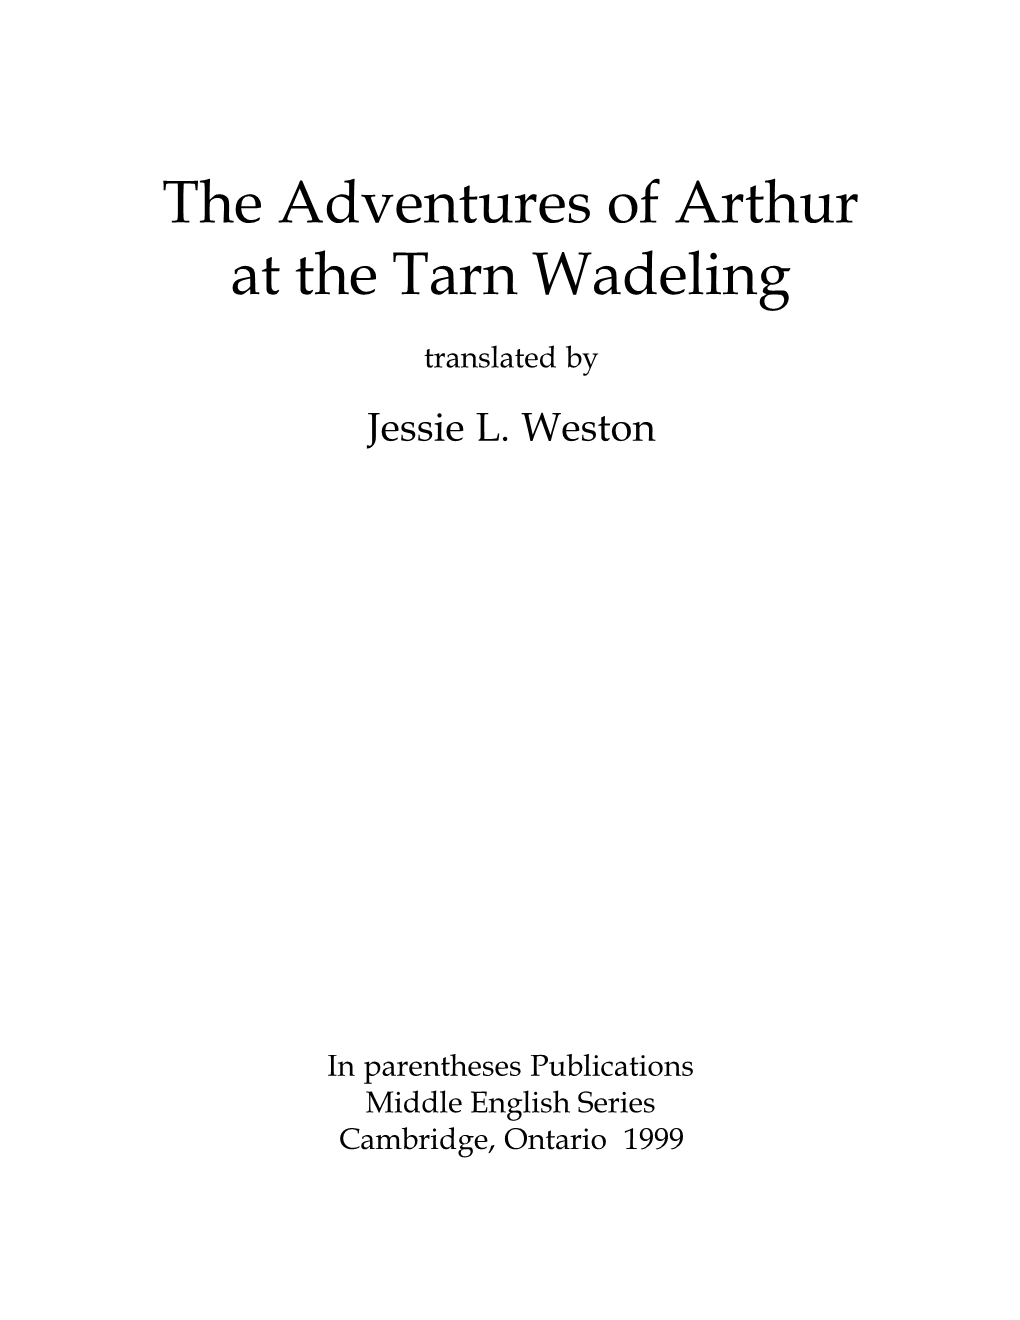 The Adventures of Arthur at the Tarn Wadeling